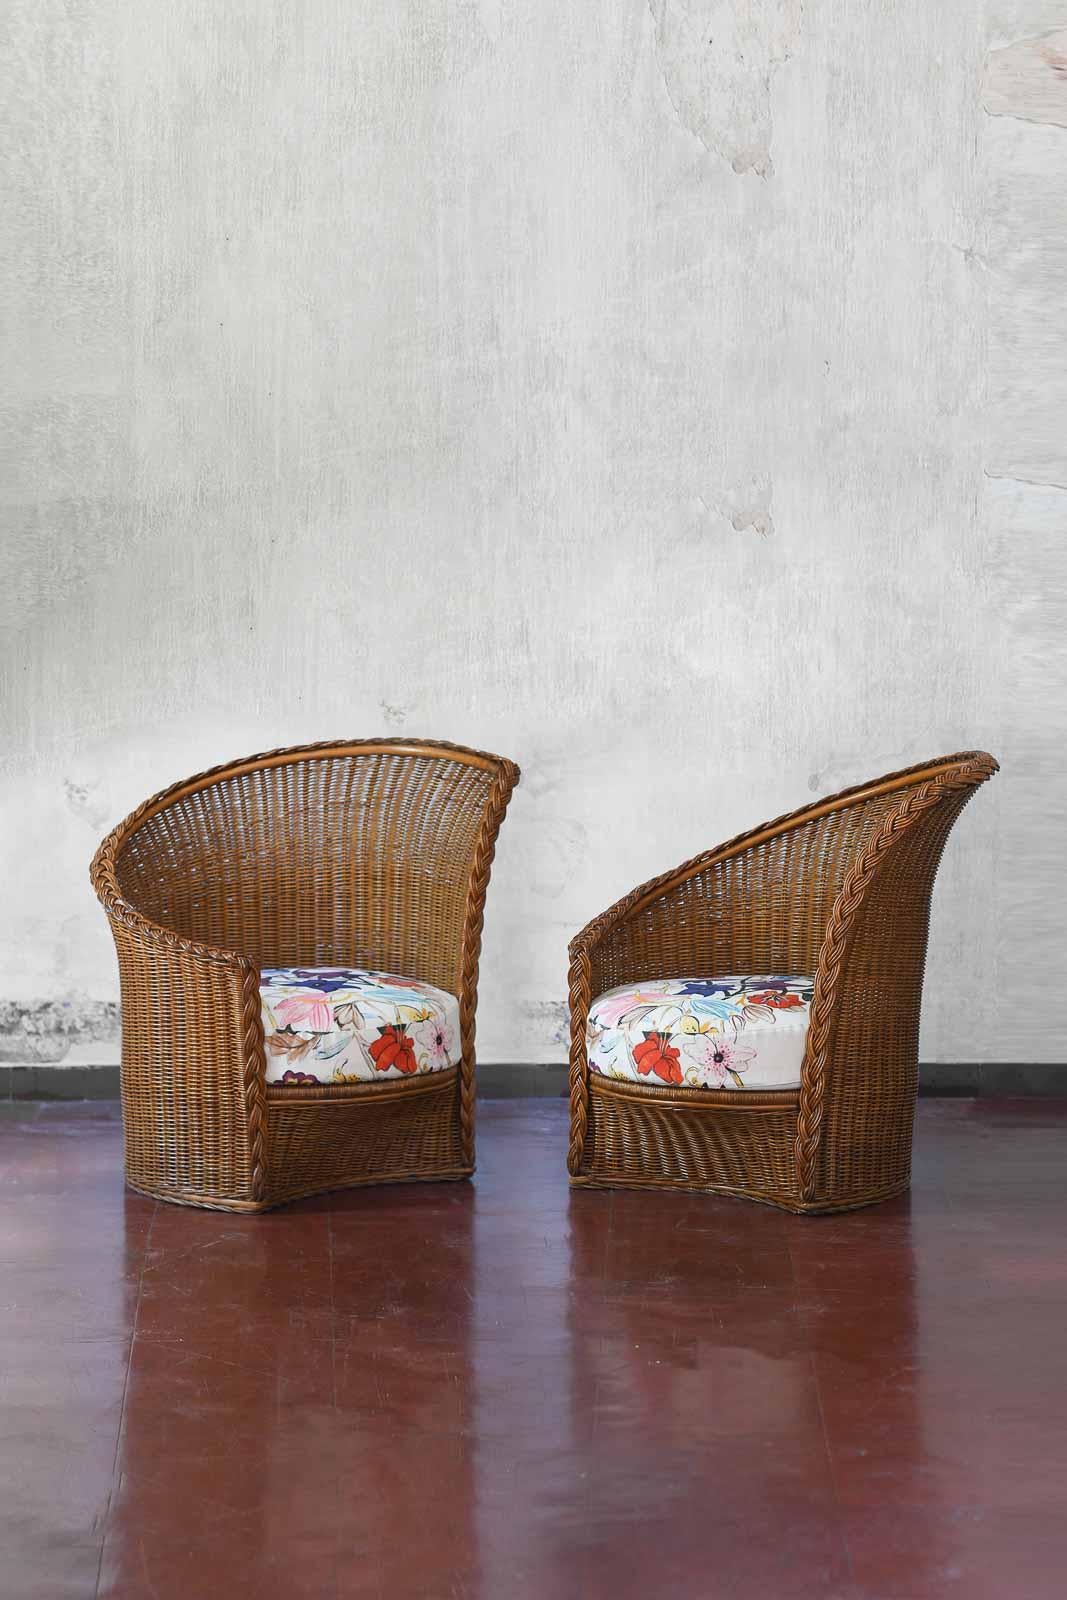 Pair of rattan and wicker armchairs in dark finish. 
Complete with cushions in Dedar fabric – “About Flowers” cod001
Product details
Italian production, 1980s.
Dimensions: 95 W x 97 H x 88 D
Sold as: set of 2
